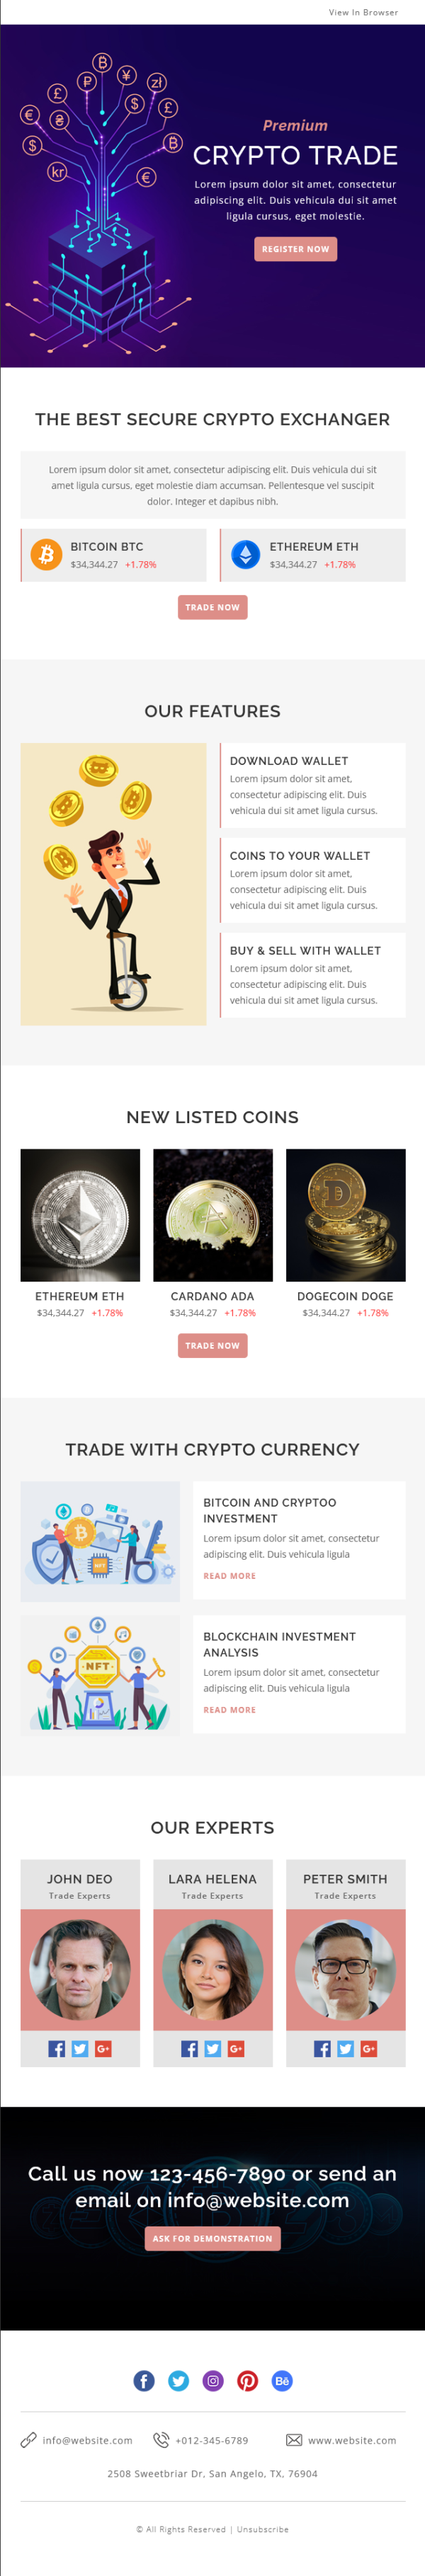 Crypto Trade - Multipurpose Responsive Email Template